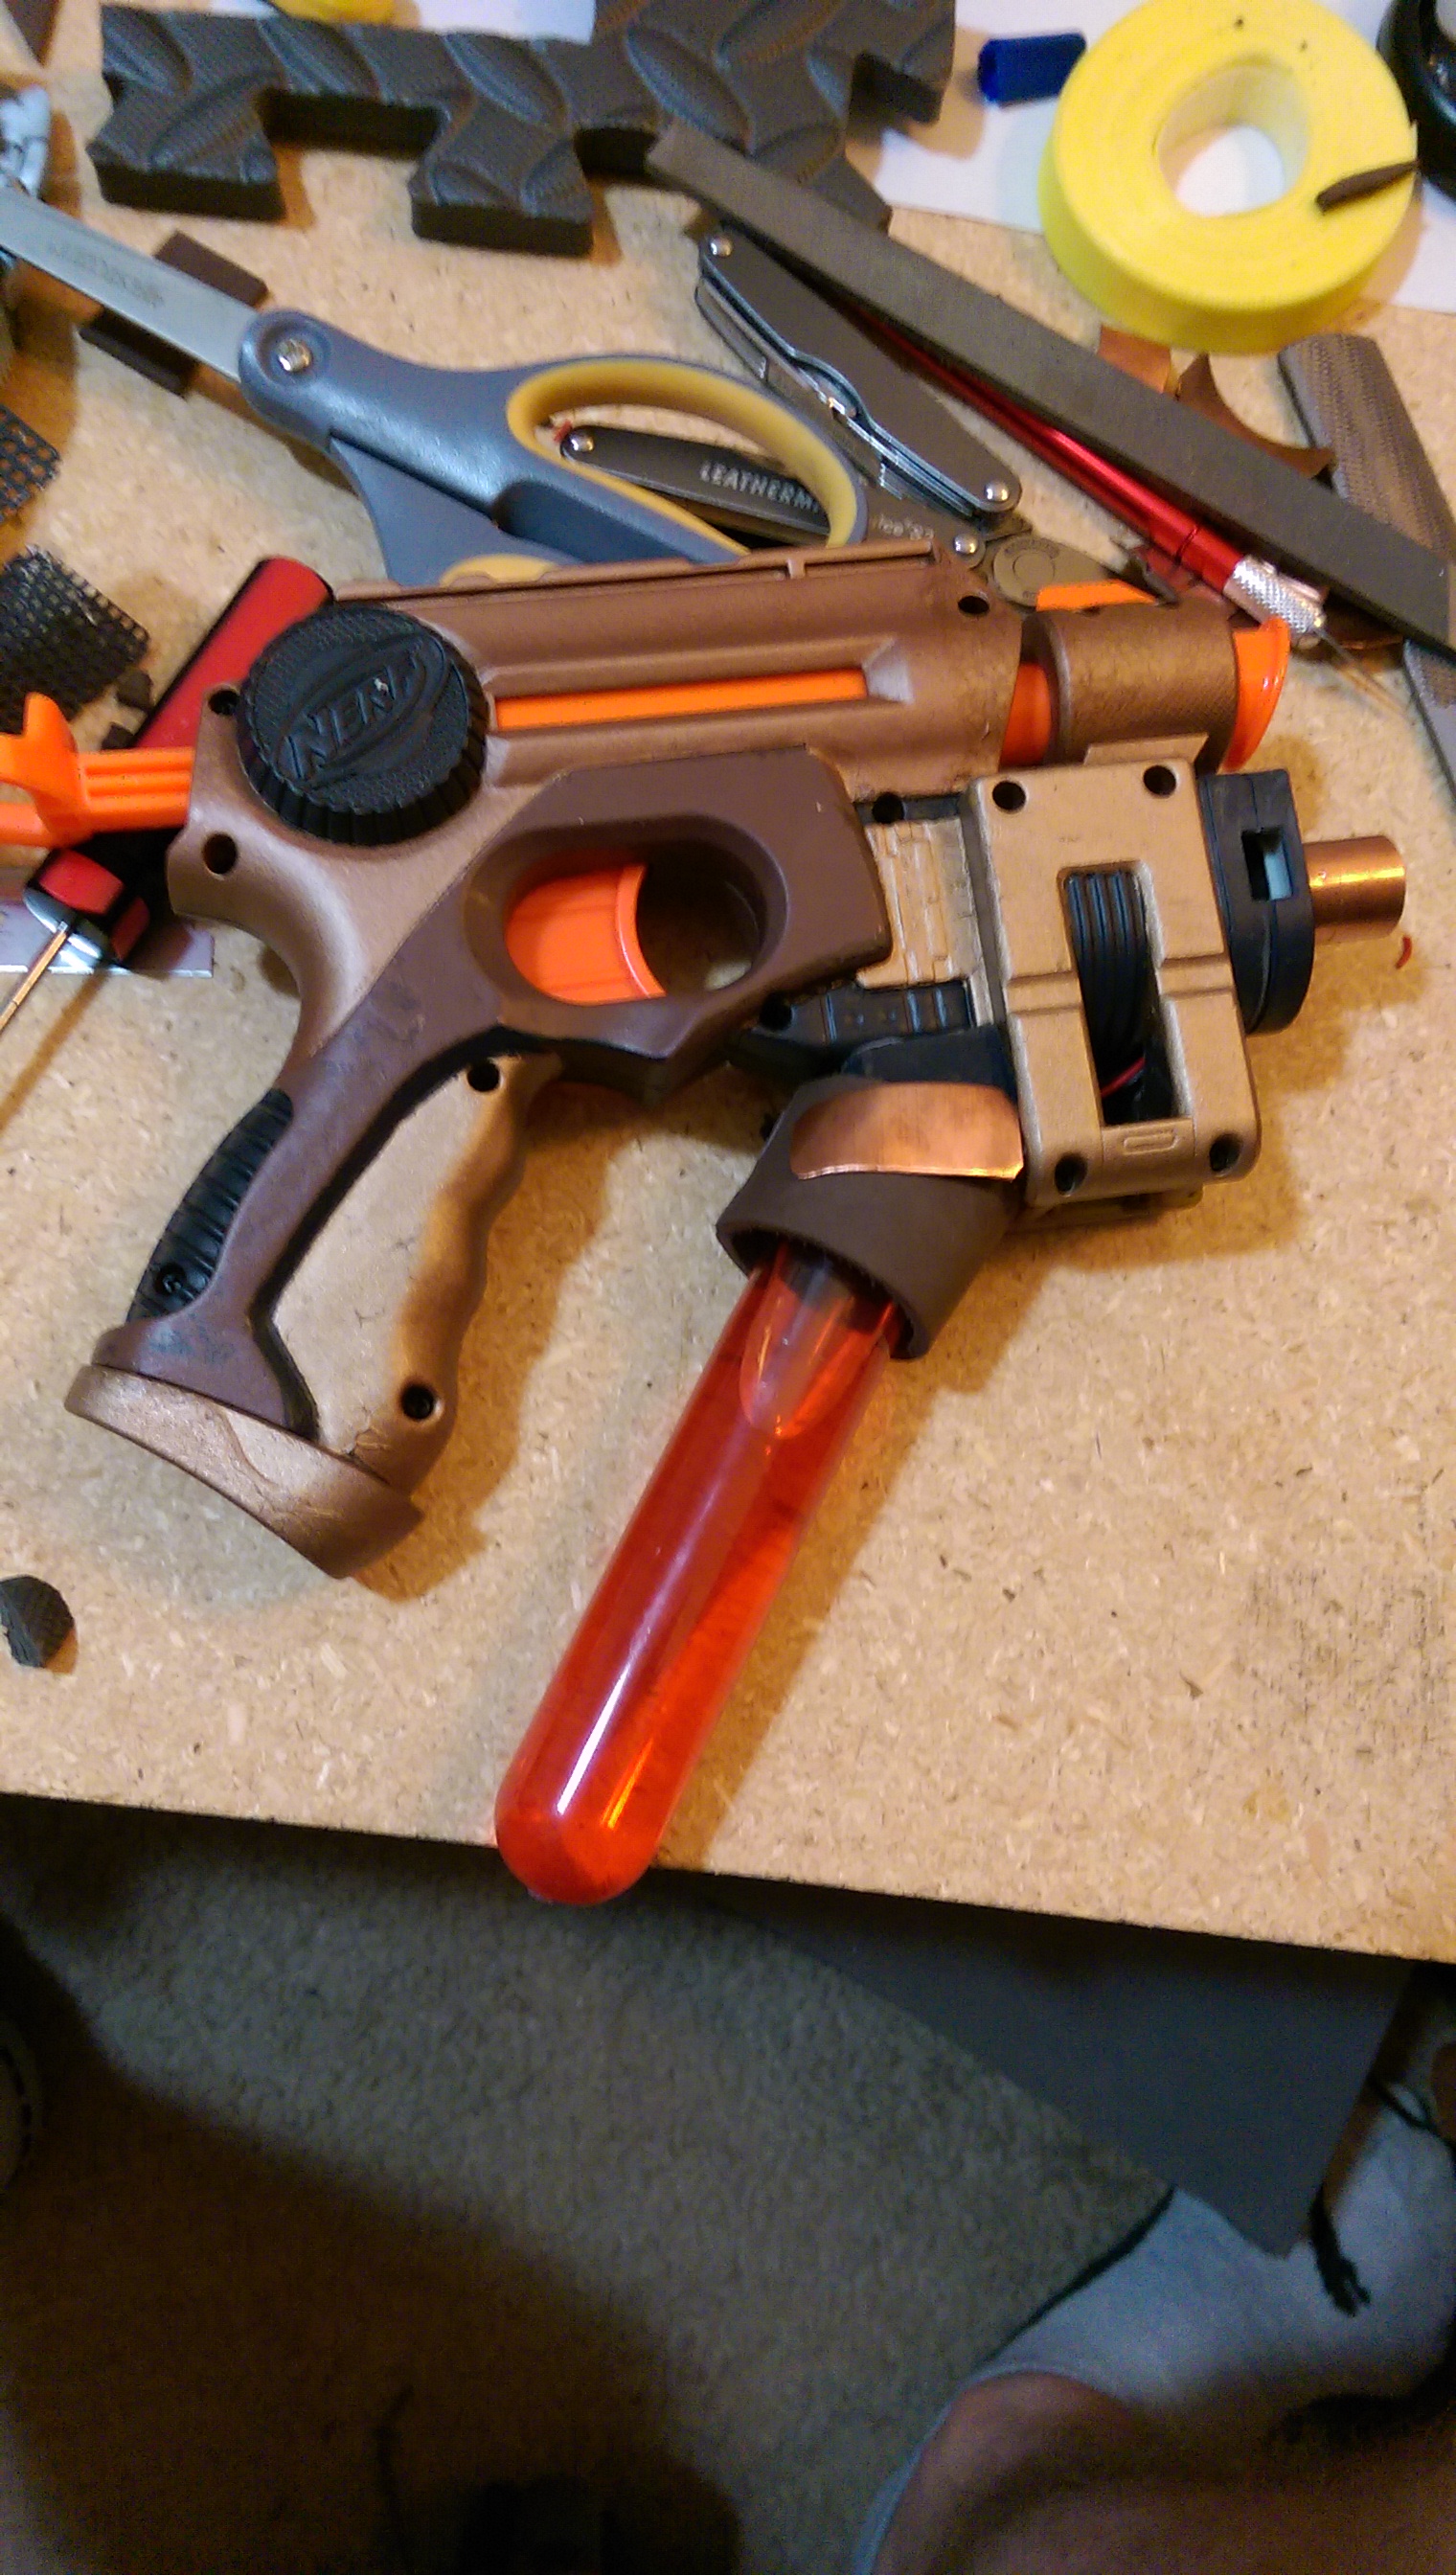 Blaster completed (I forgot to take an extra WIP picture)